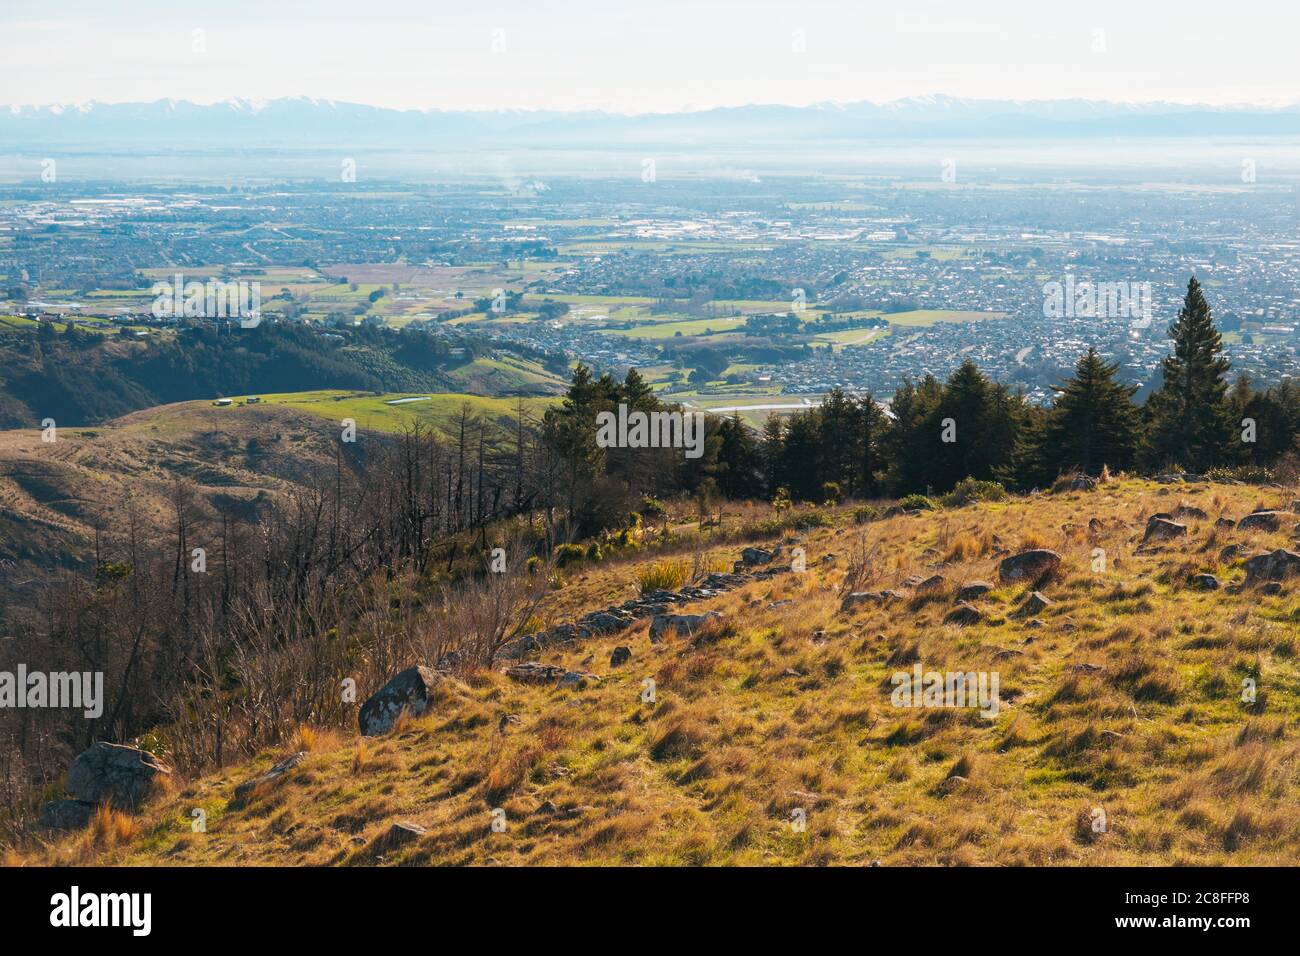 The view over the city of Christchurch as seen from the Thomson Scenic Reserve, Port Hills, New Zealand Stock Photo